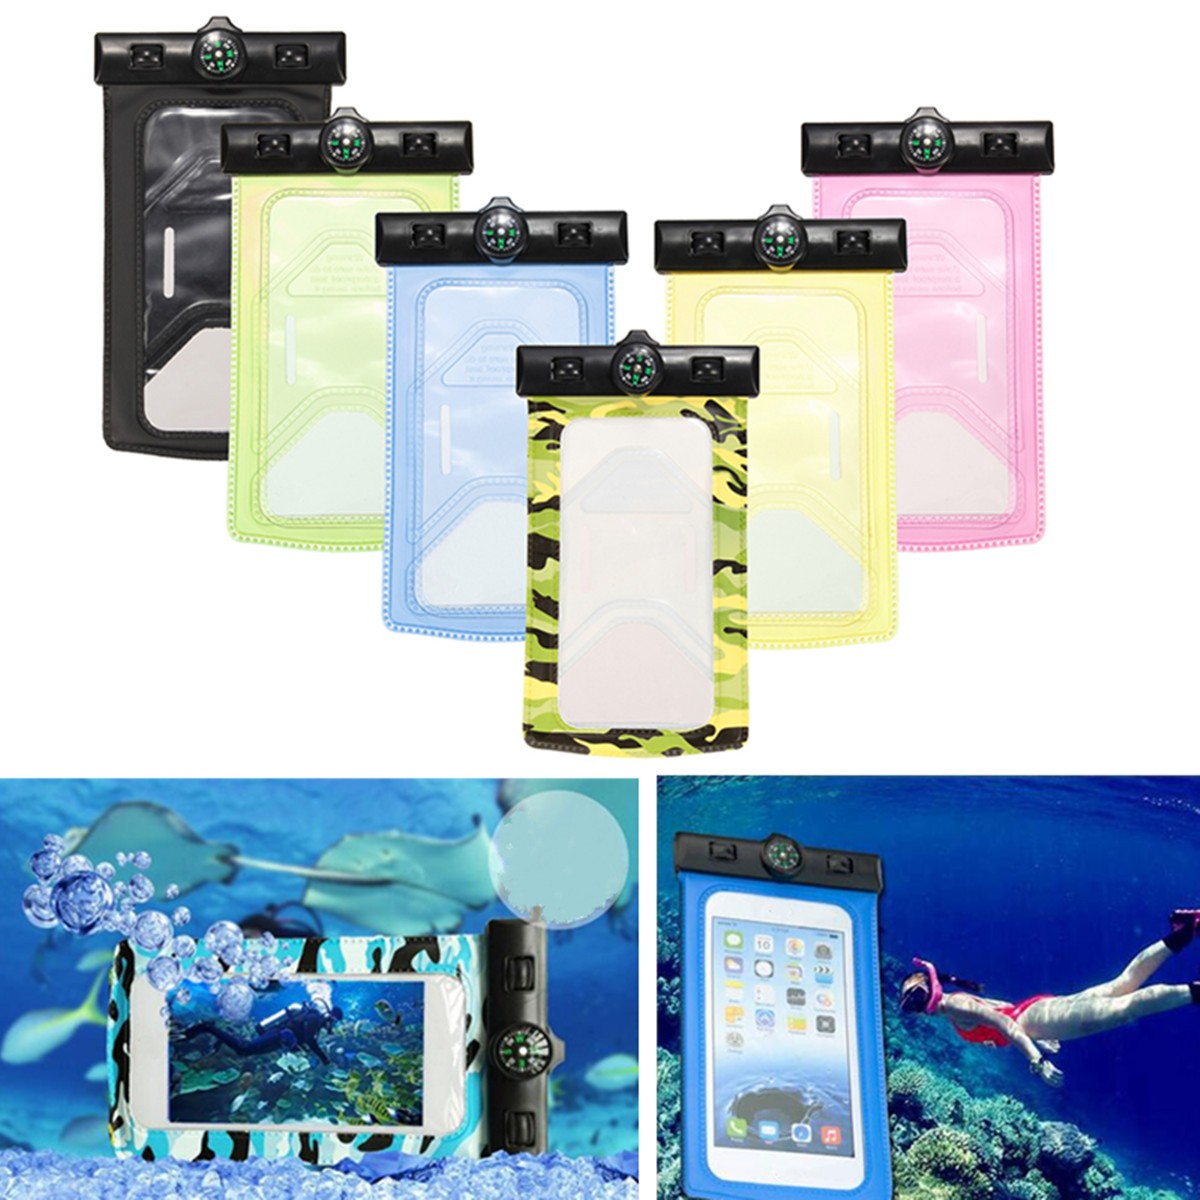 

Waterproof IPX8 Under Water Pouch Bag Case Cover + Compass For 3.5-inch To 6-inch Cell Phone